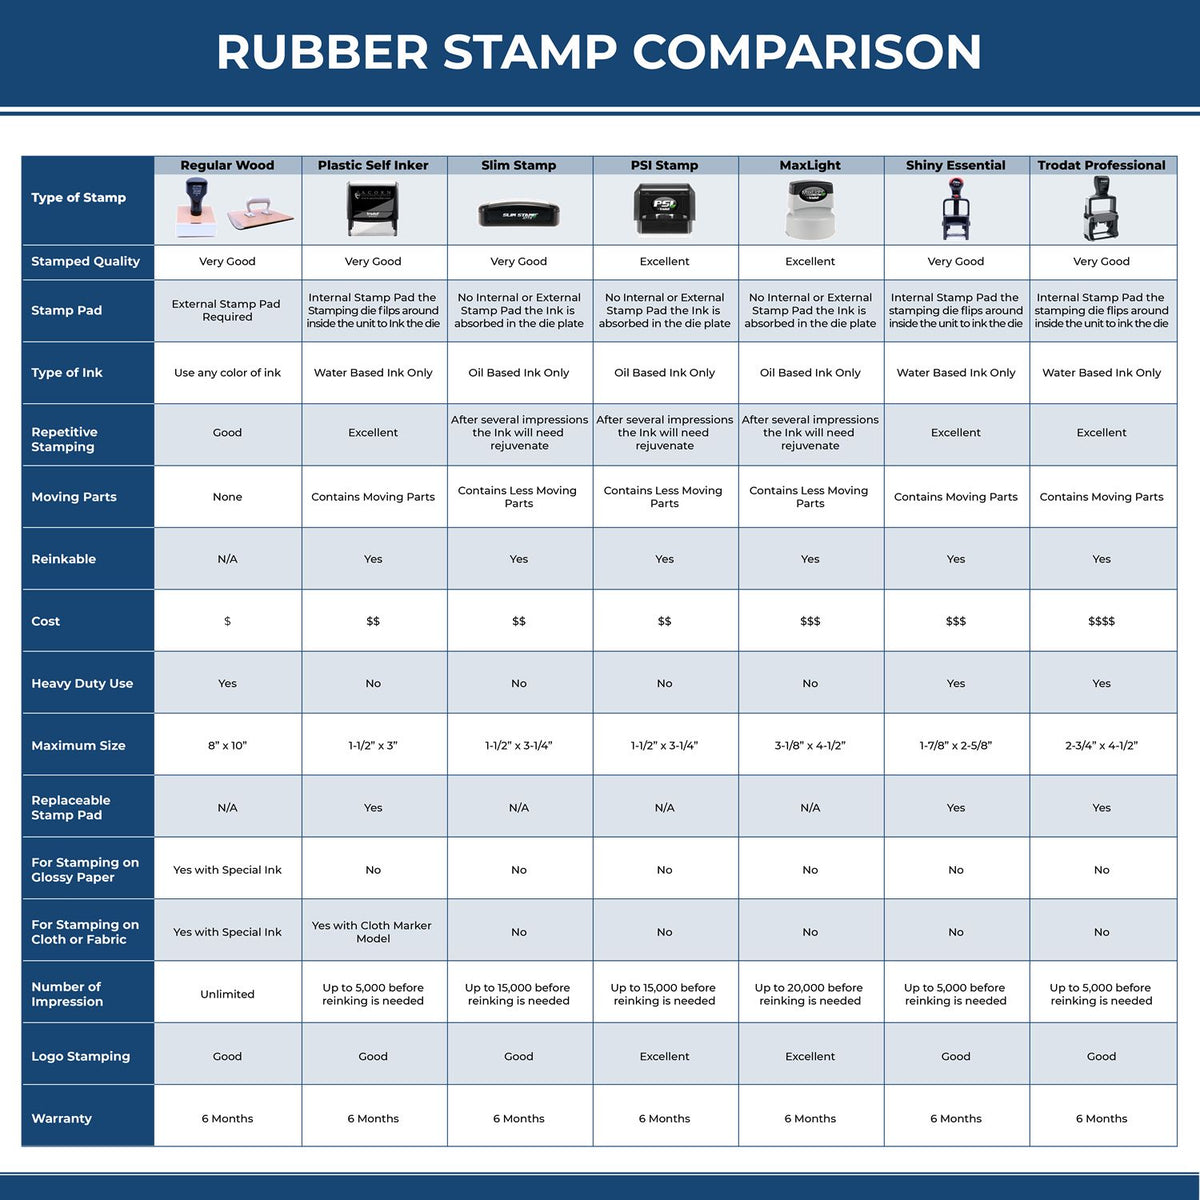 Large Self Inking No Insurance Stamp 4510S Rubber Stamp Comparison